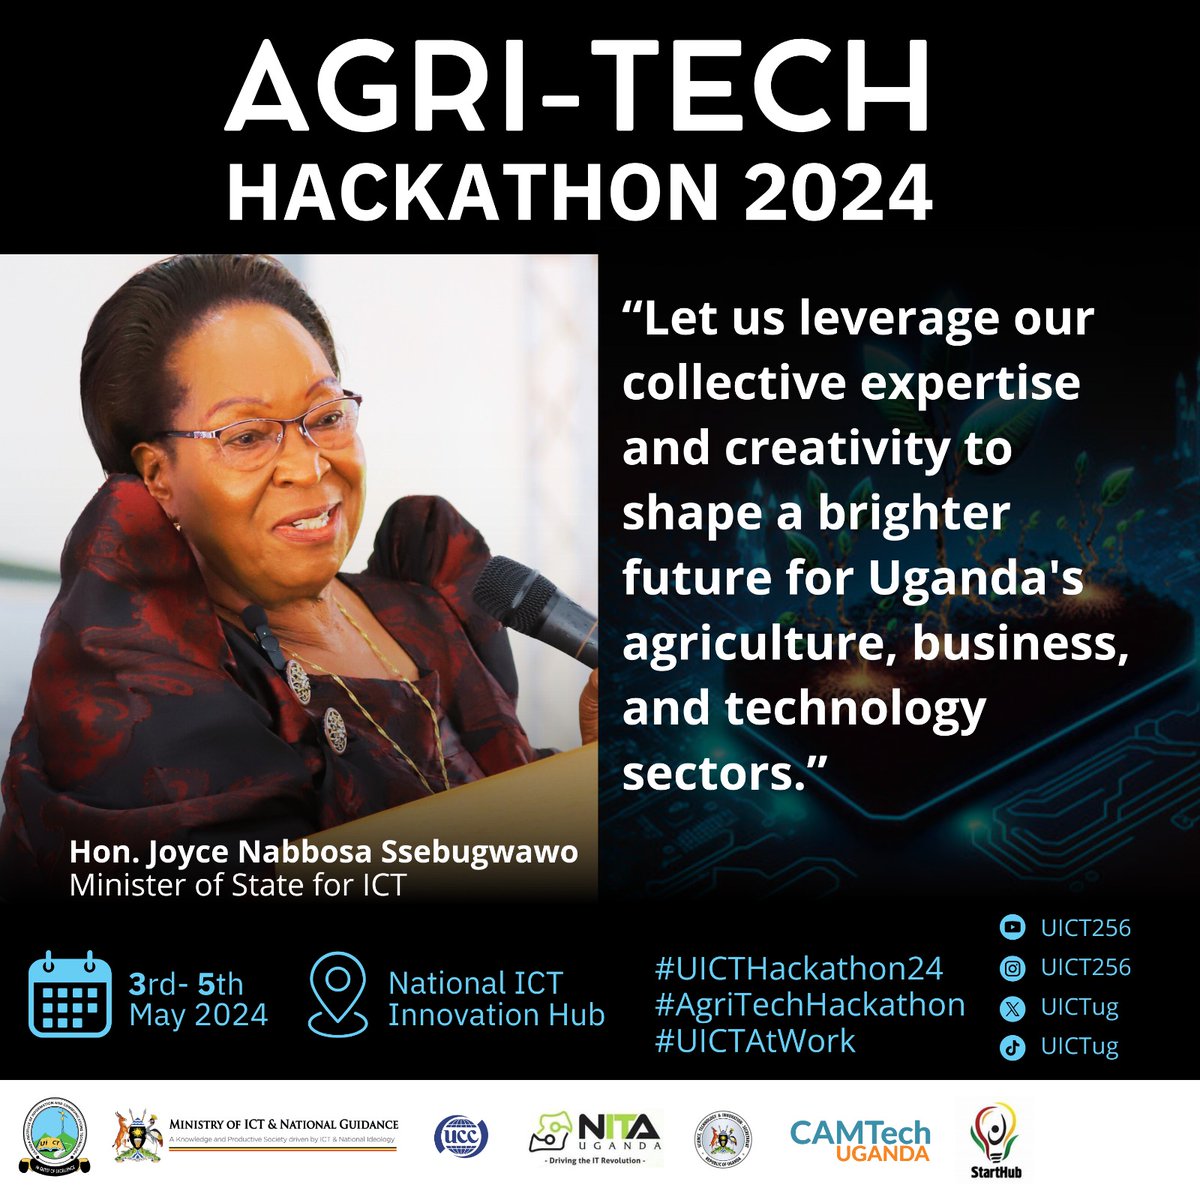 Together, we can build a brighter tomorrow where technology serves as a catalyst for positive transformation, leaving a lasting legacy of prosperity for generations to come. #UICTHackathon24 @UICTug #AgriTechHackathon @MoICT_Ug @InnovationHubUg @NITAUganda1 @CamtechUganda